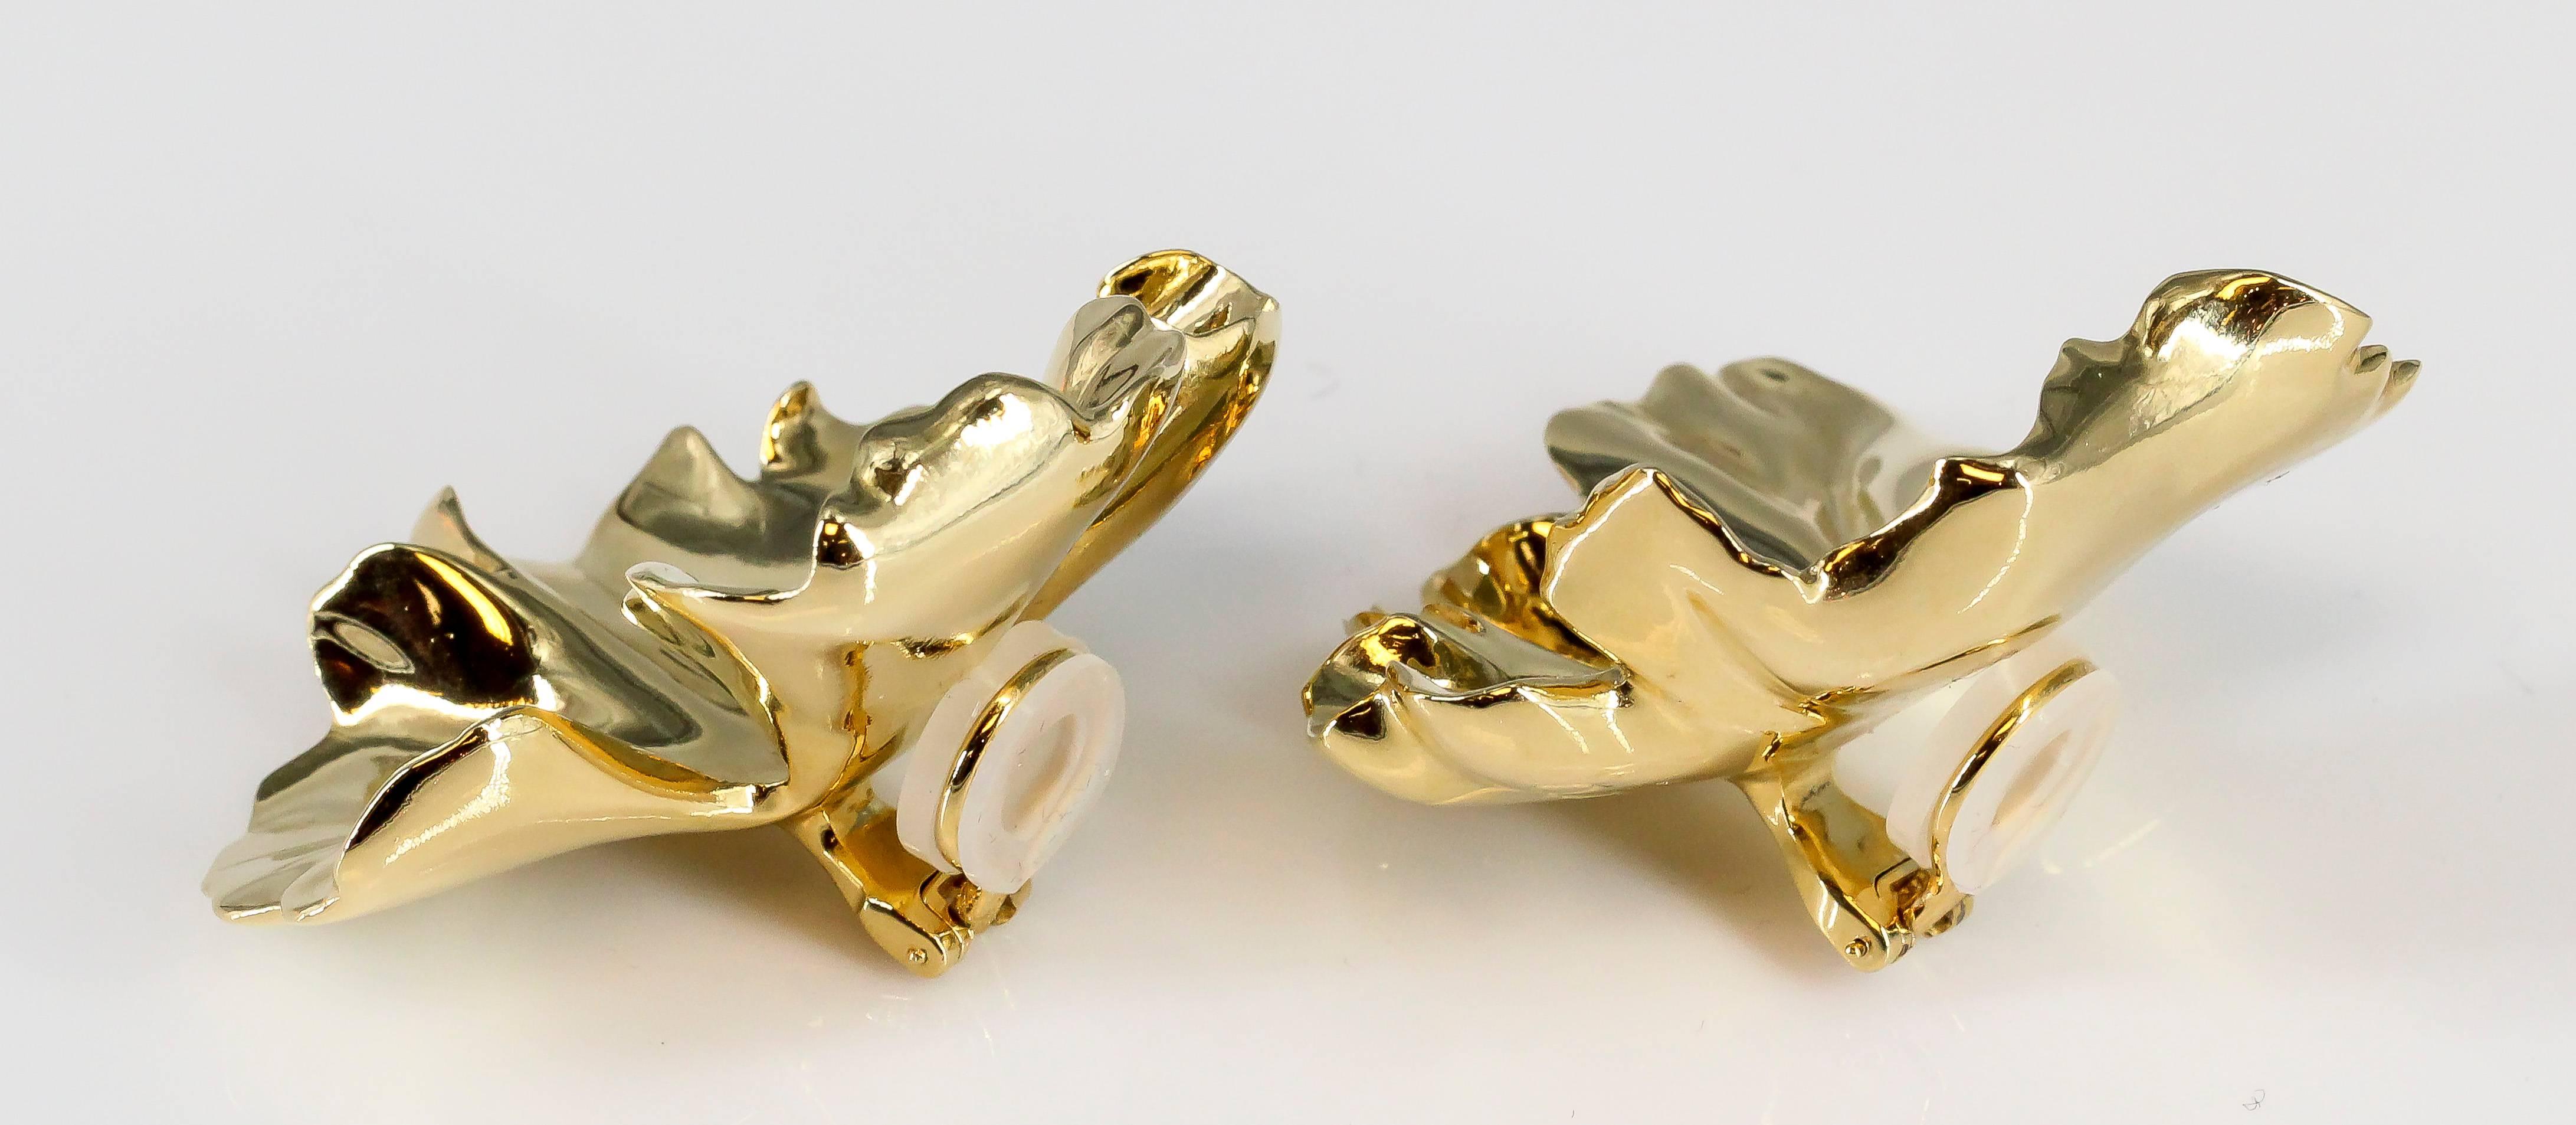 Unusual gold-tone aluminum geranium earrings by JAR, Joel Arthur Rosenthal. These are the large model and are made in limited edition. Pouch is included in sale. Beautiful workmanship and highly collectible.

Hallmarks: JAR, Paris, reference numbers.